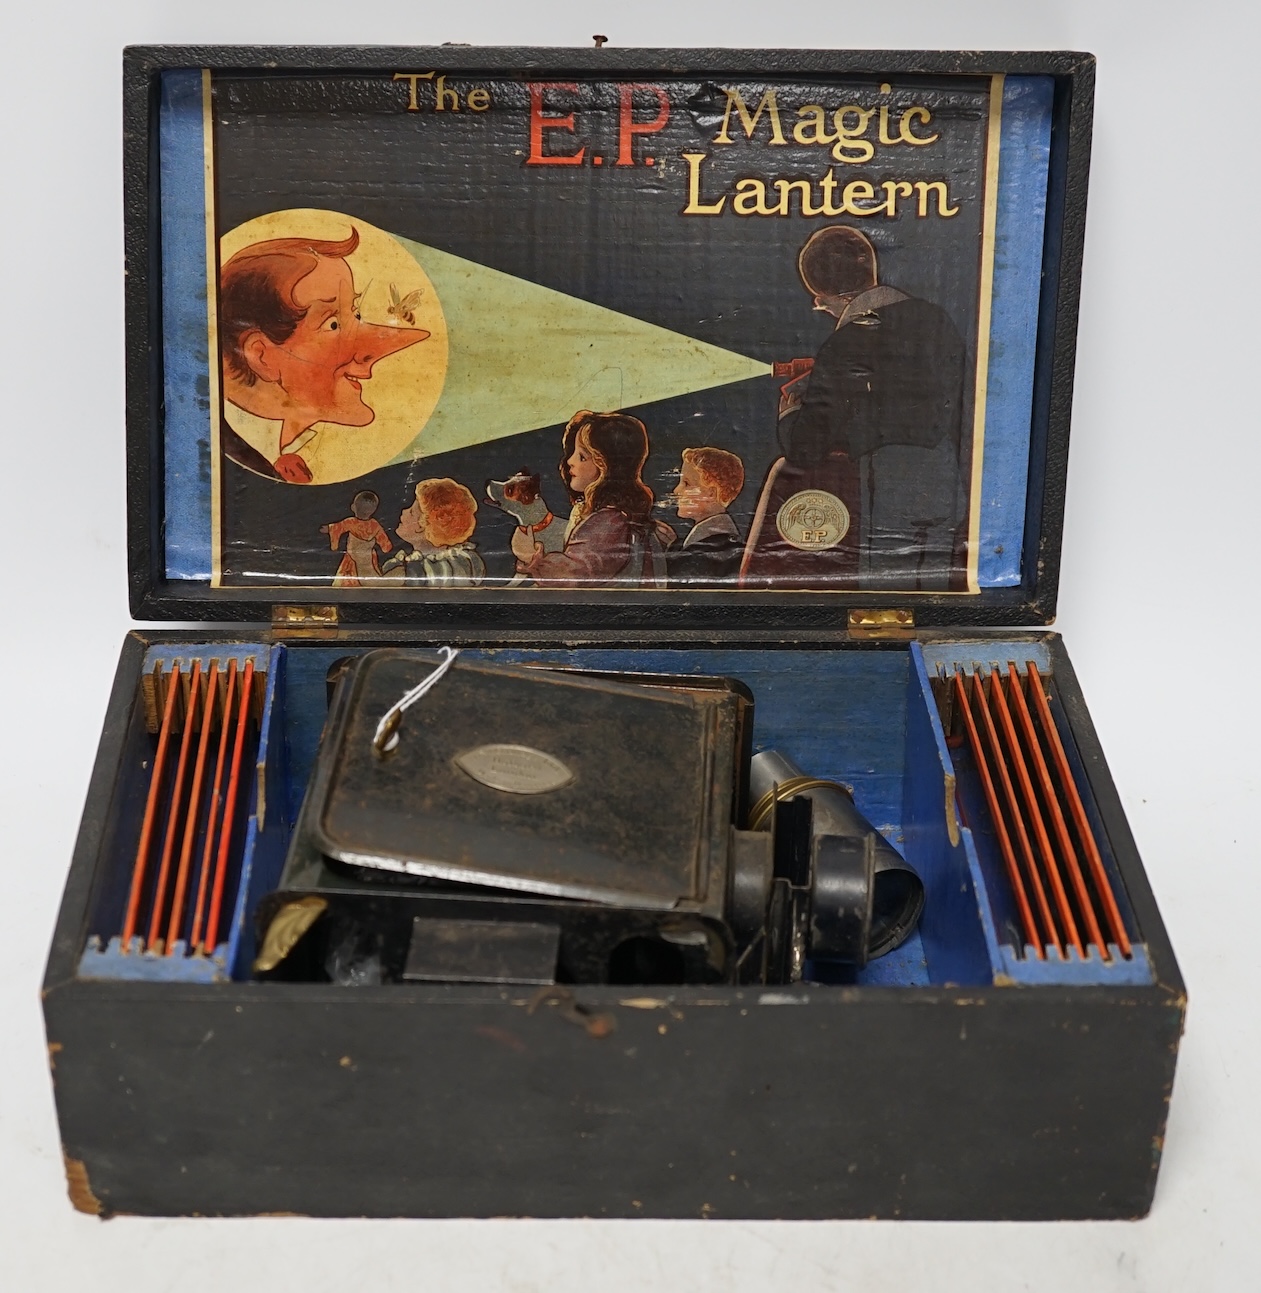 From the Studio of Fred Cuming. Vintage E.P. magic lantern and slides, cased. Condition - fair